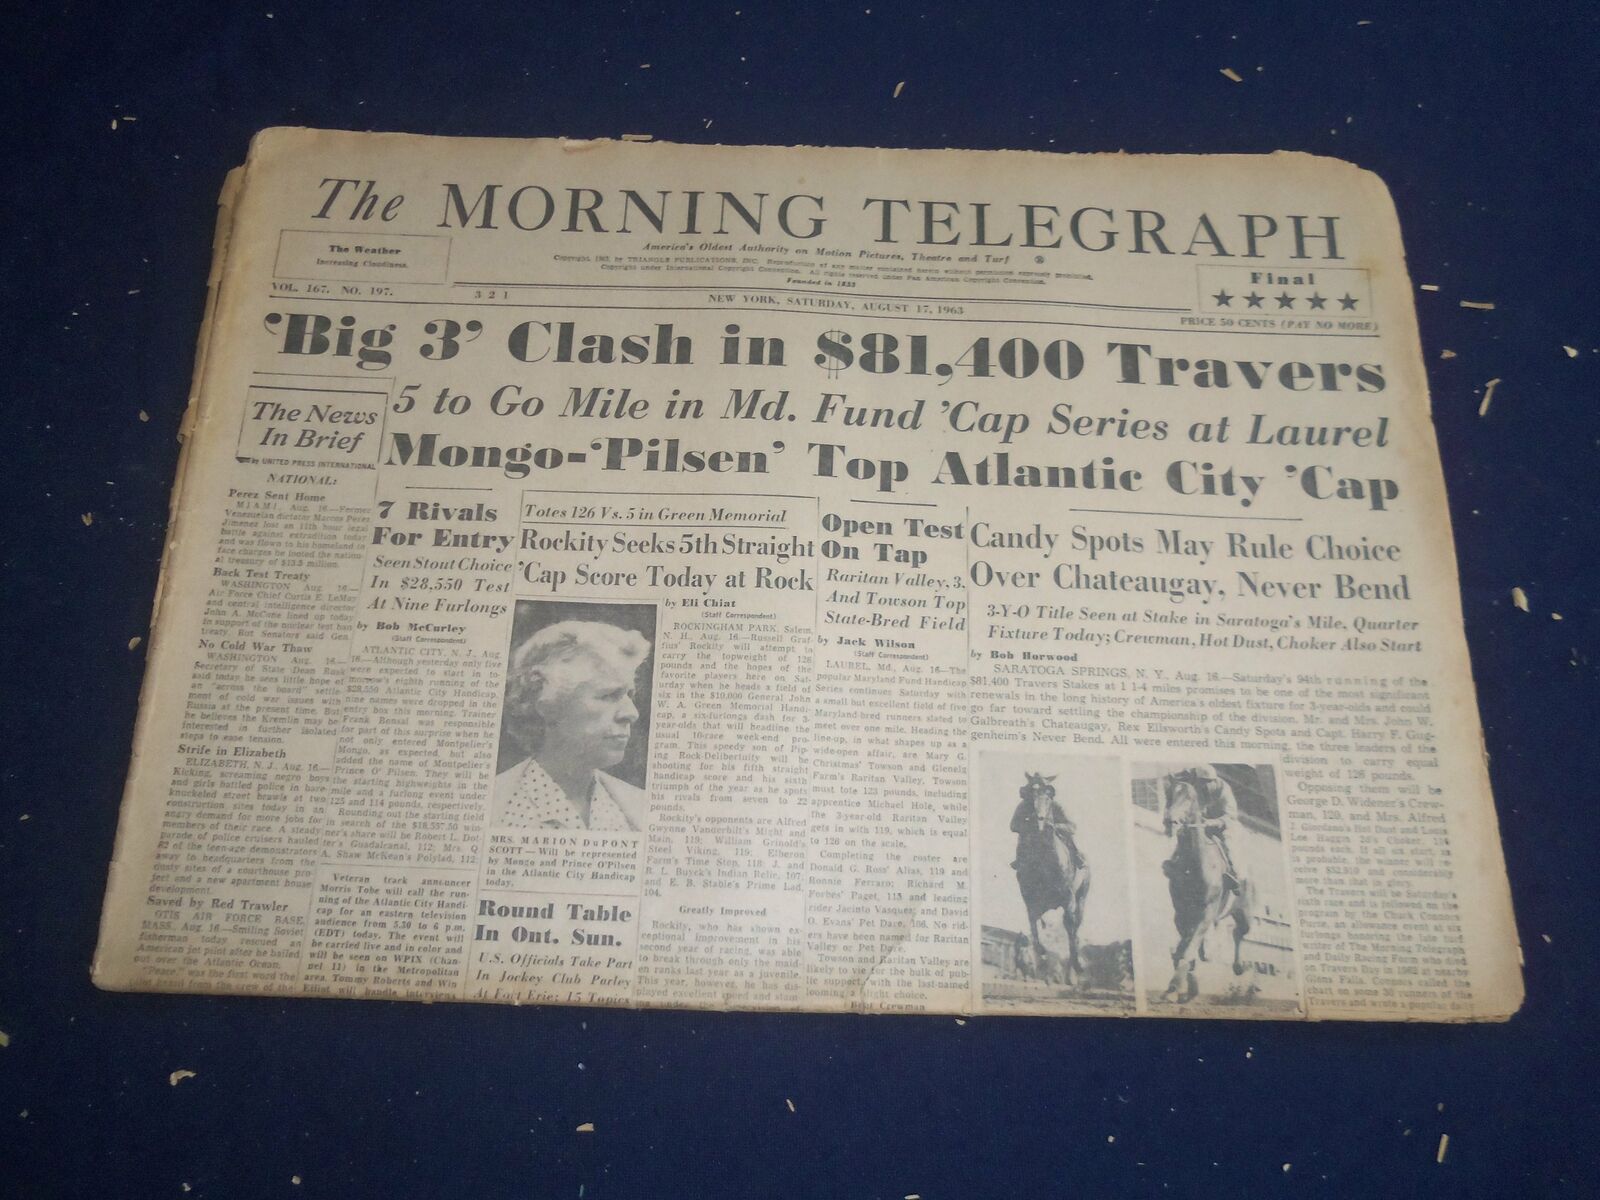 1963 AUGUST 17 THE MORNING TELEGRAPH - BIG 3 CLASH IN $81,400 TRAVERS - NP 5551